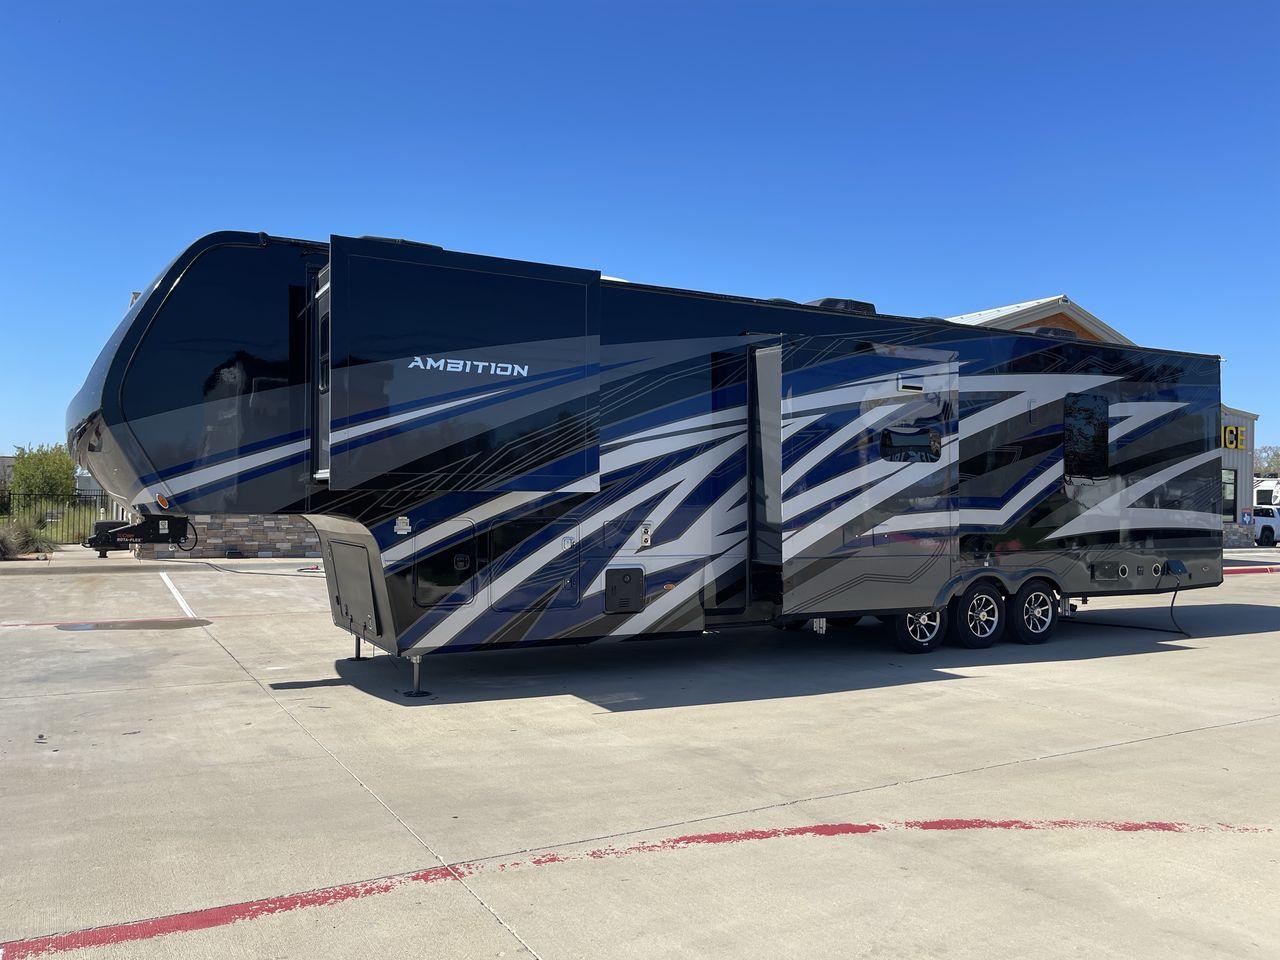 2022 VANLEIGH AMBITION 399TH (7HHAC4333NV) , Length: 43.58 ft. | Dry Weight: 16,900 lbs. | Gross Weight: 21,000 lbs. | Slides: 2 transmission, located at 4319 N Main St, Cleburne, TX, 76033, (817) 678-5133, 32.385960, -97.391212 - If you're in the market for a top-of-the-line Toy Hauler, look no further than RV Depot in Cleburne, TX. We are proud to present the VANLEIGH AMBITION 399TH, a luxurious and spacious RV that is sure to enhance your next adventure. With a price of $99,987, this 2022 model is a steal! Located in Cleb - Photo #28